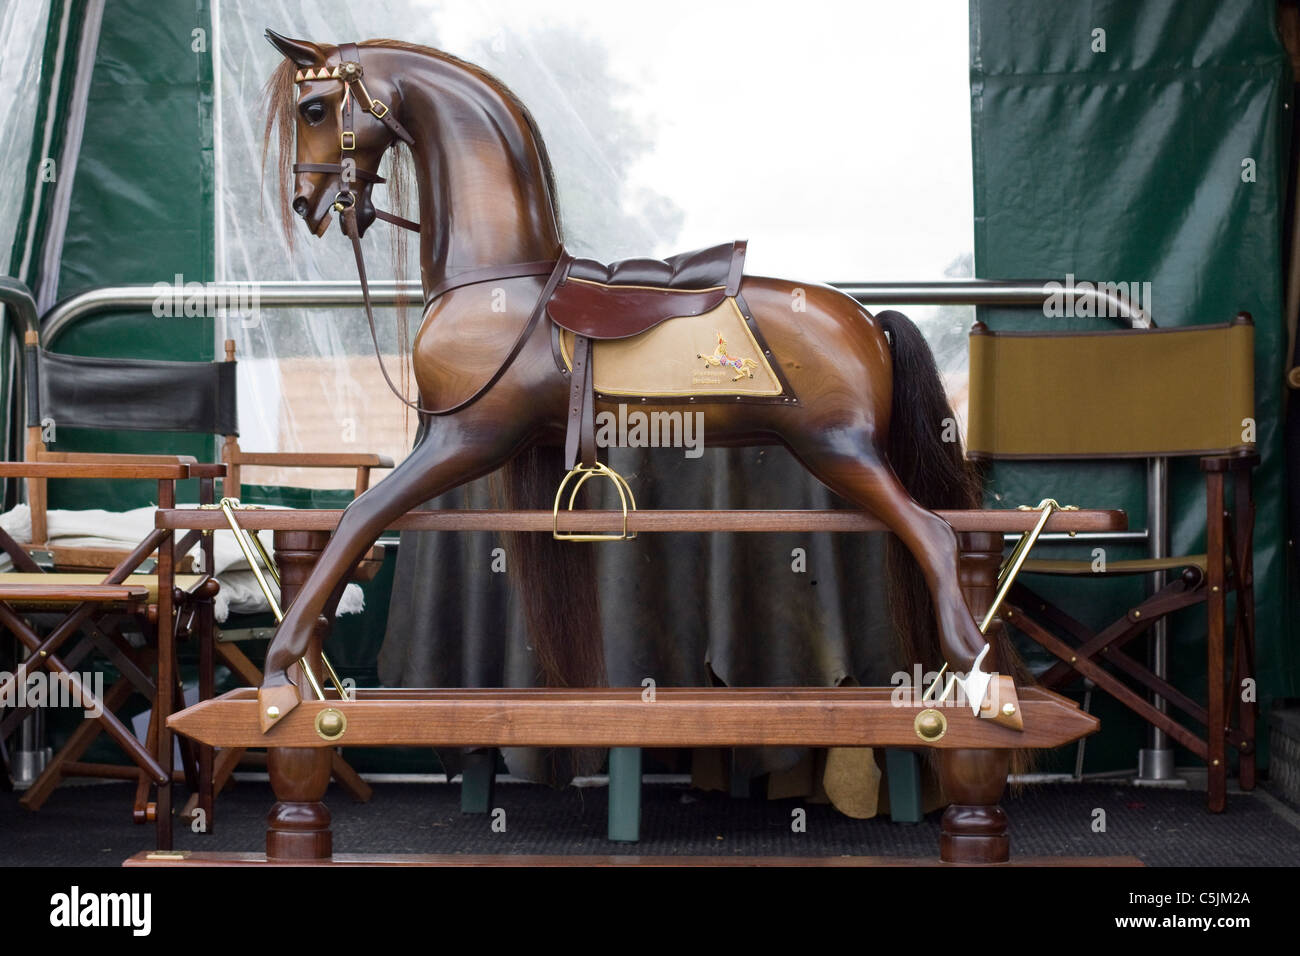 A Old rocking horse on sale at a show in England Stock Photo